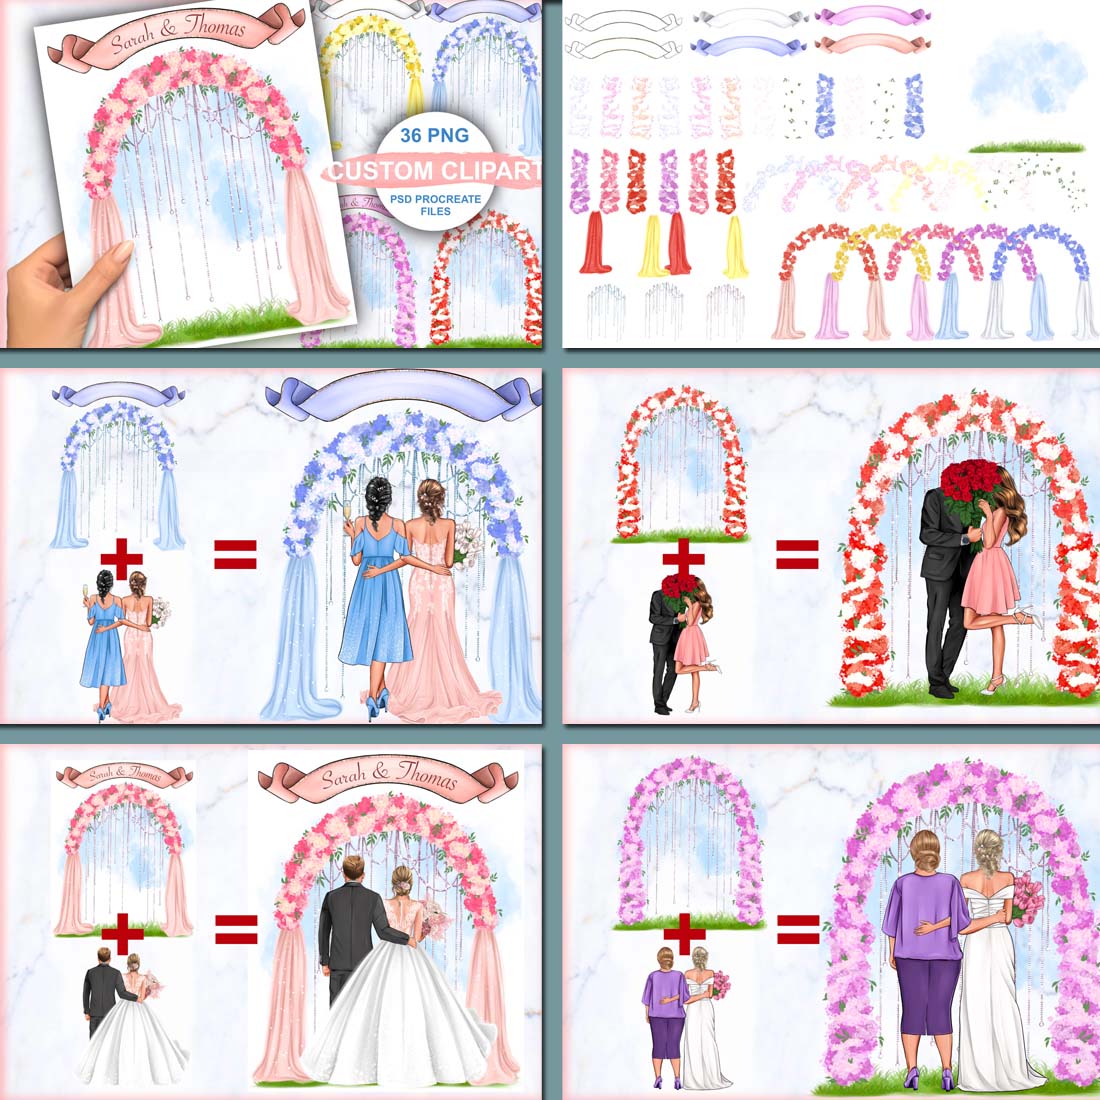 Background Clipart, Wedding Arch preview image.